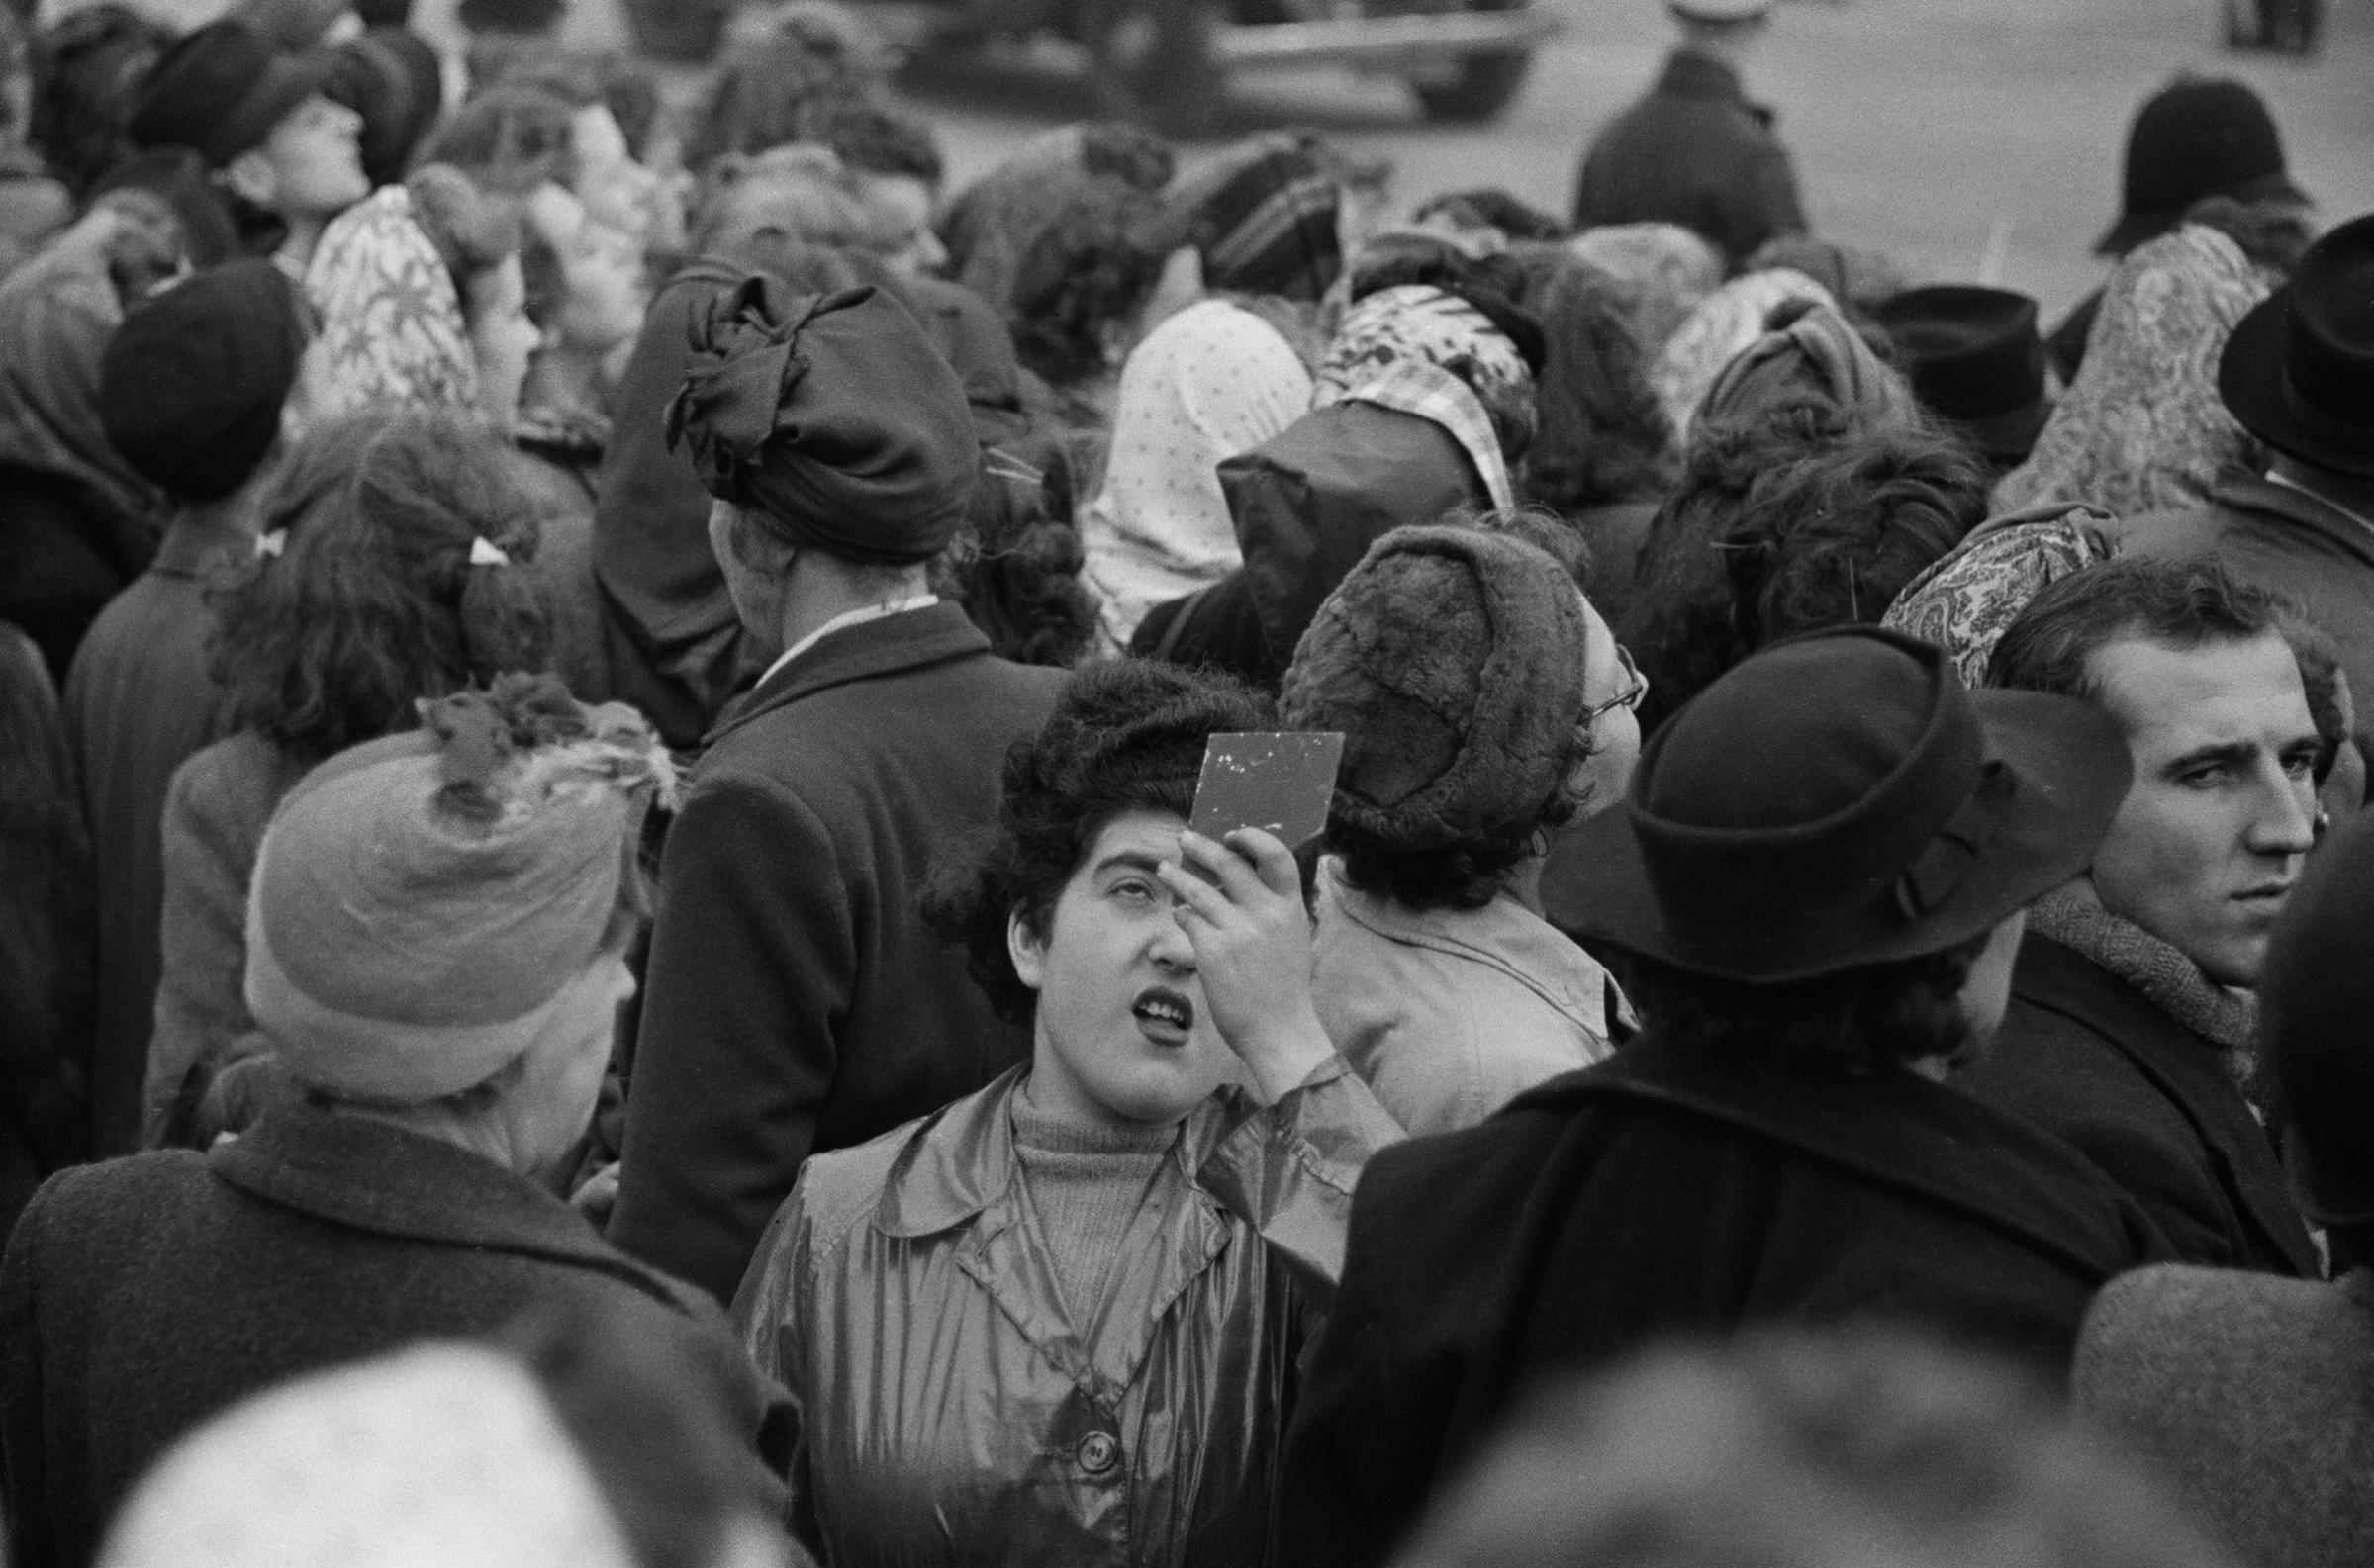 A spectator uses a hand-held mirror to see over the crowd during the wedding of Queen Elizabeth II and Prince Philip, Duke of Edinburgh, Nov. 20, 1947.